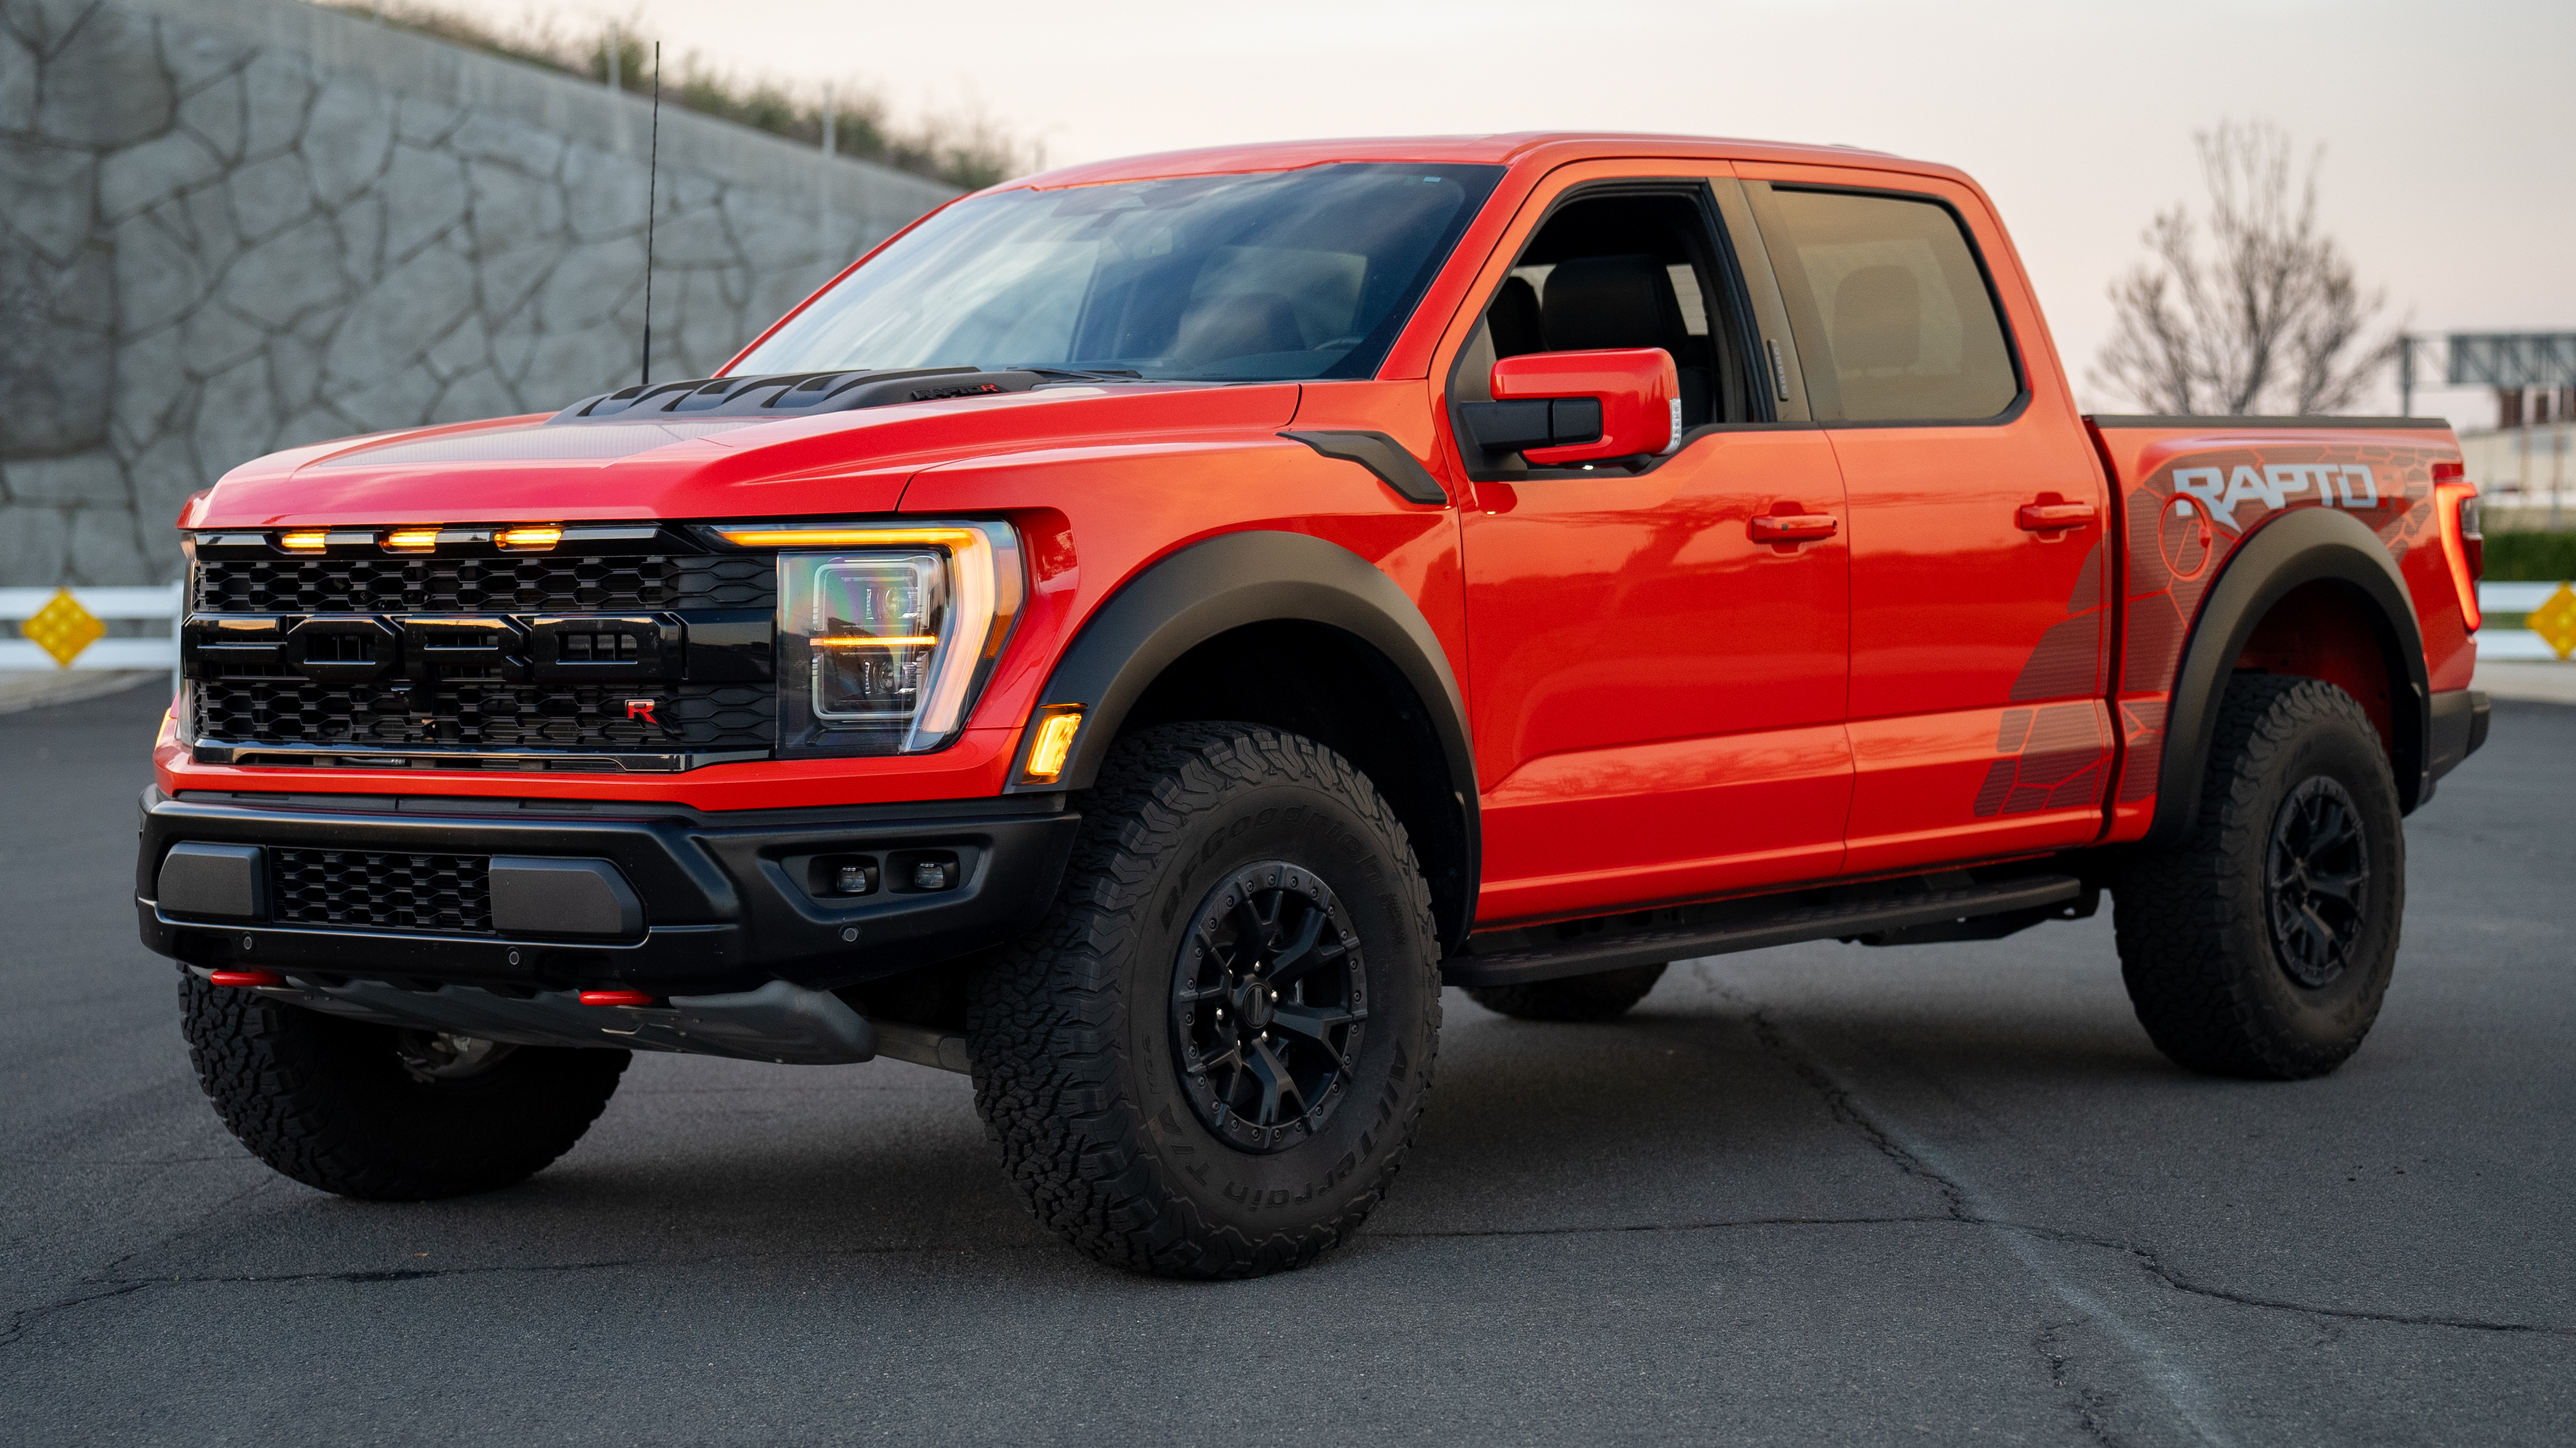 Cheapest Ford Raptor Vehicles for Sale - Autotrader